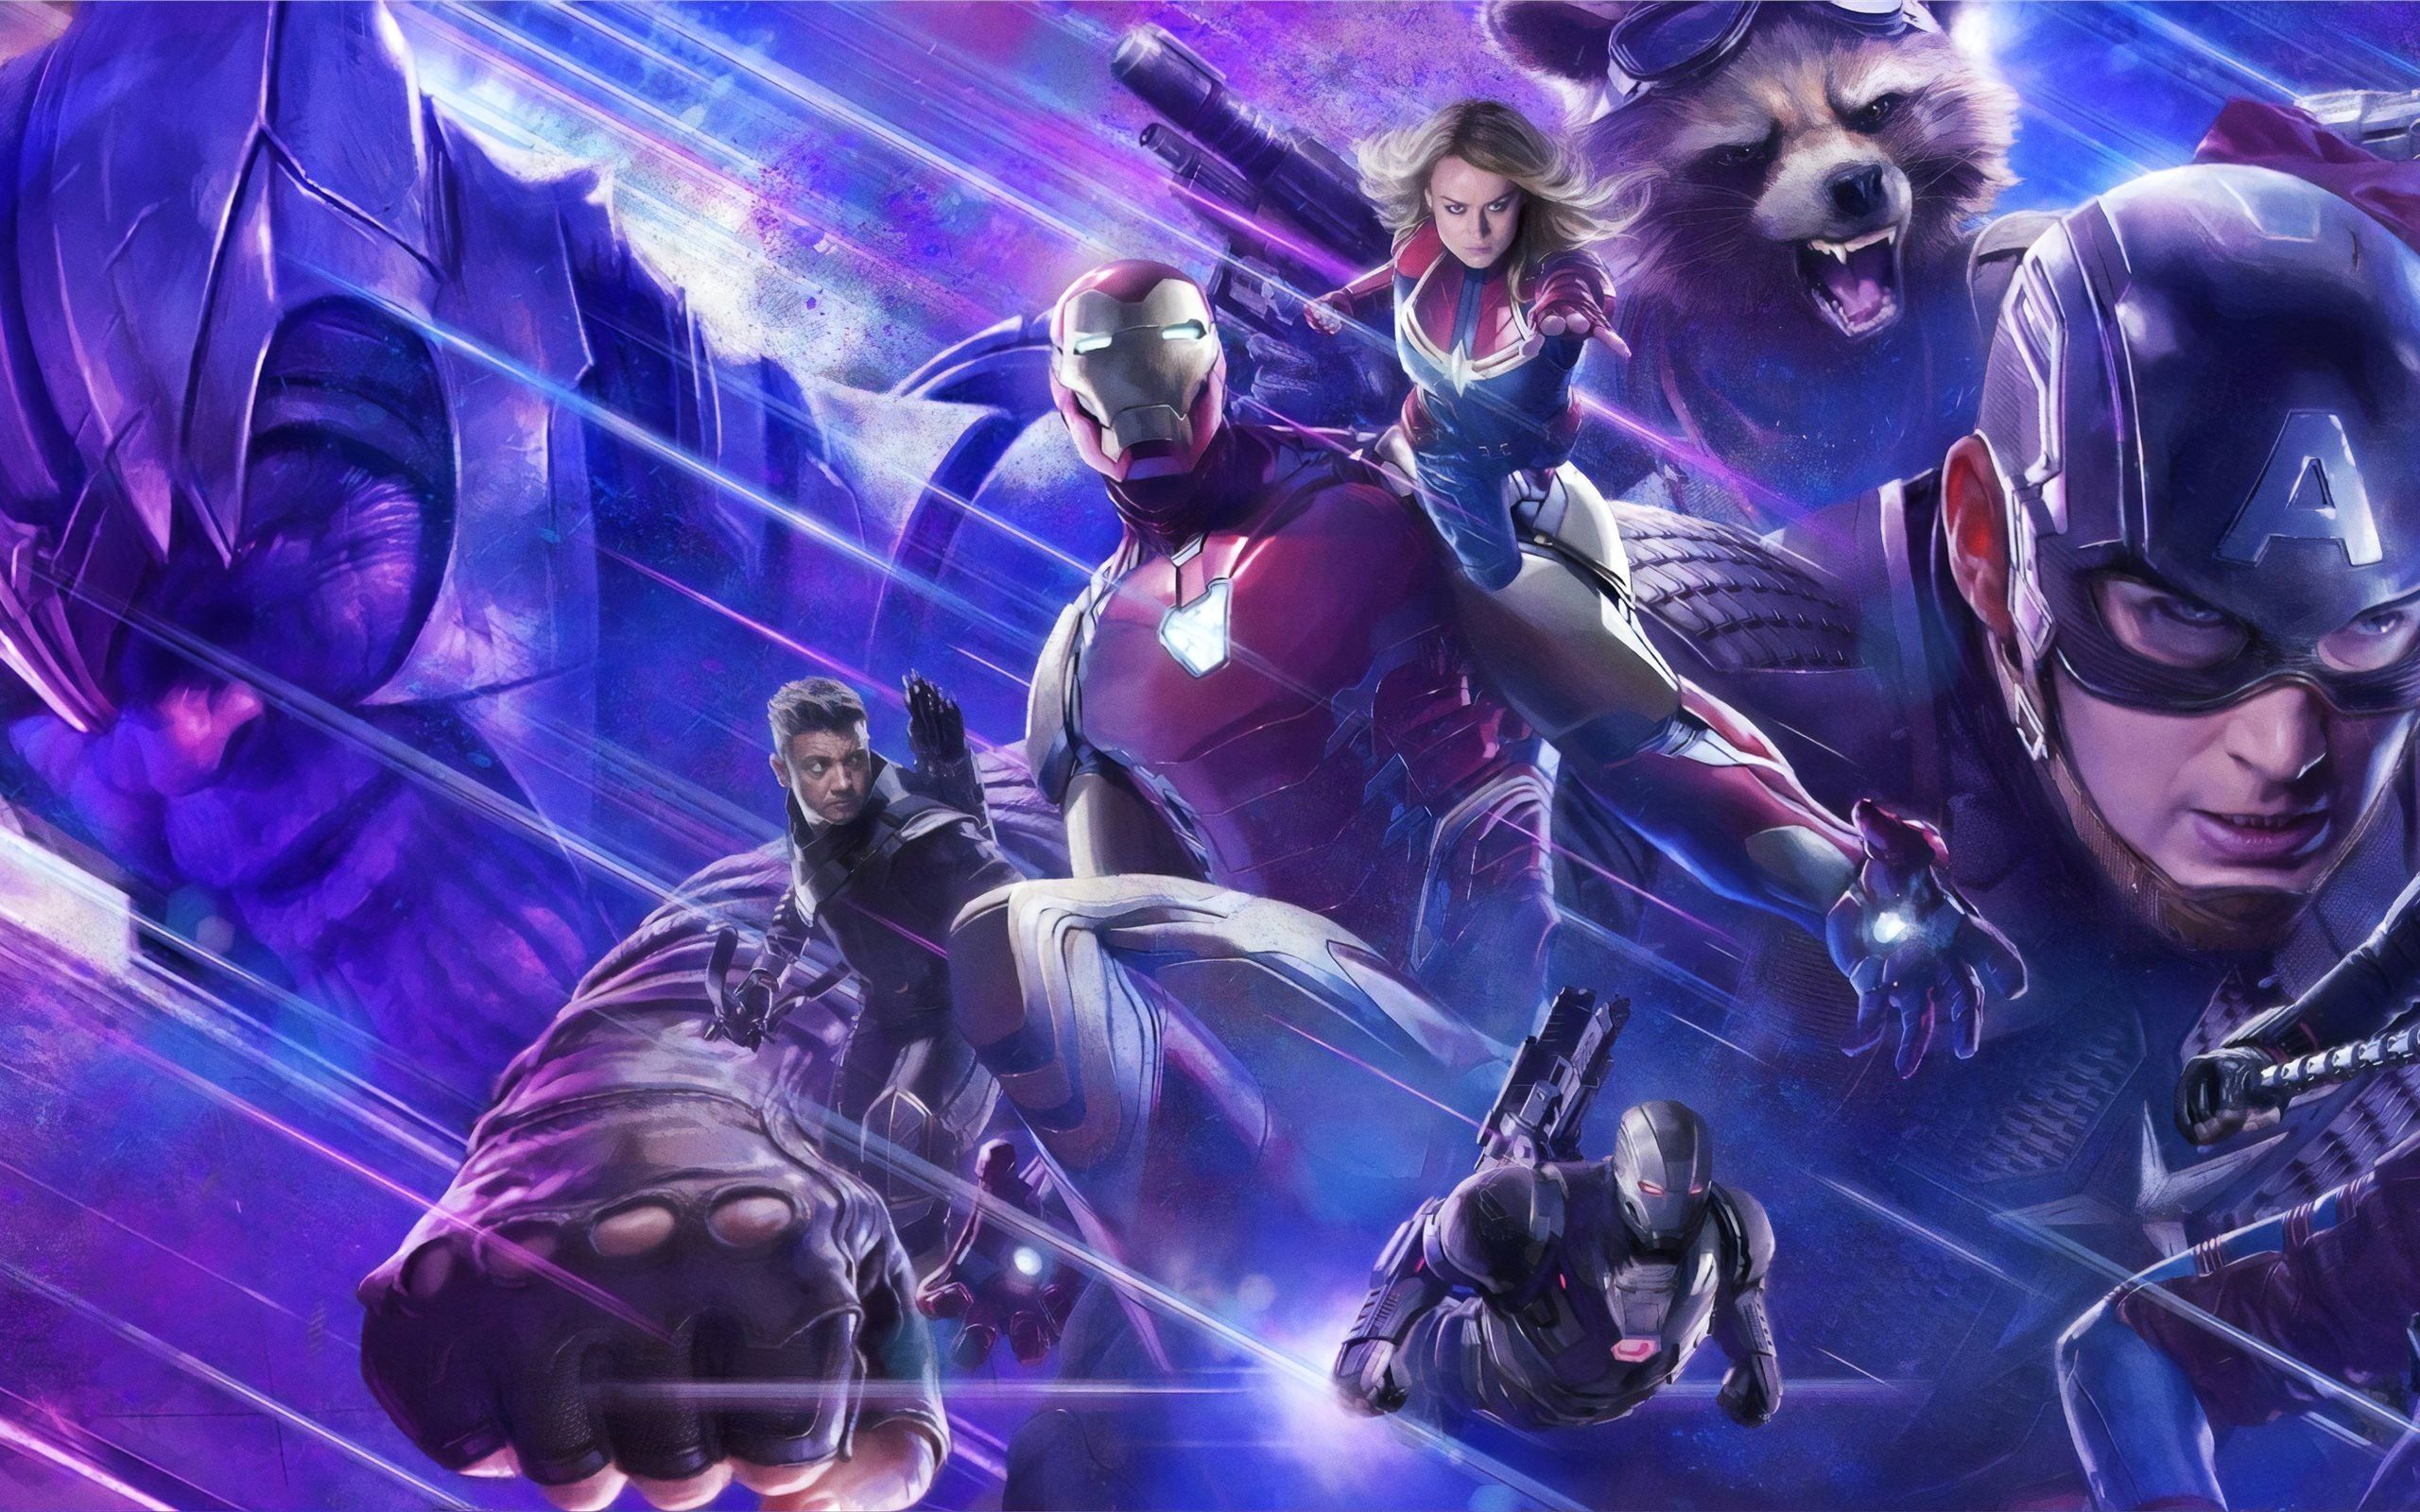 Awesome 5k Avengers Endgame 2019 New Mac Wallpapers Download.